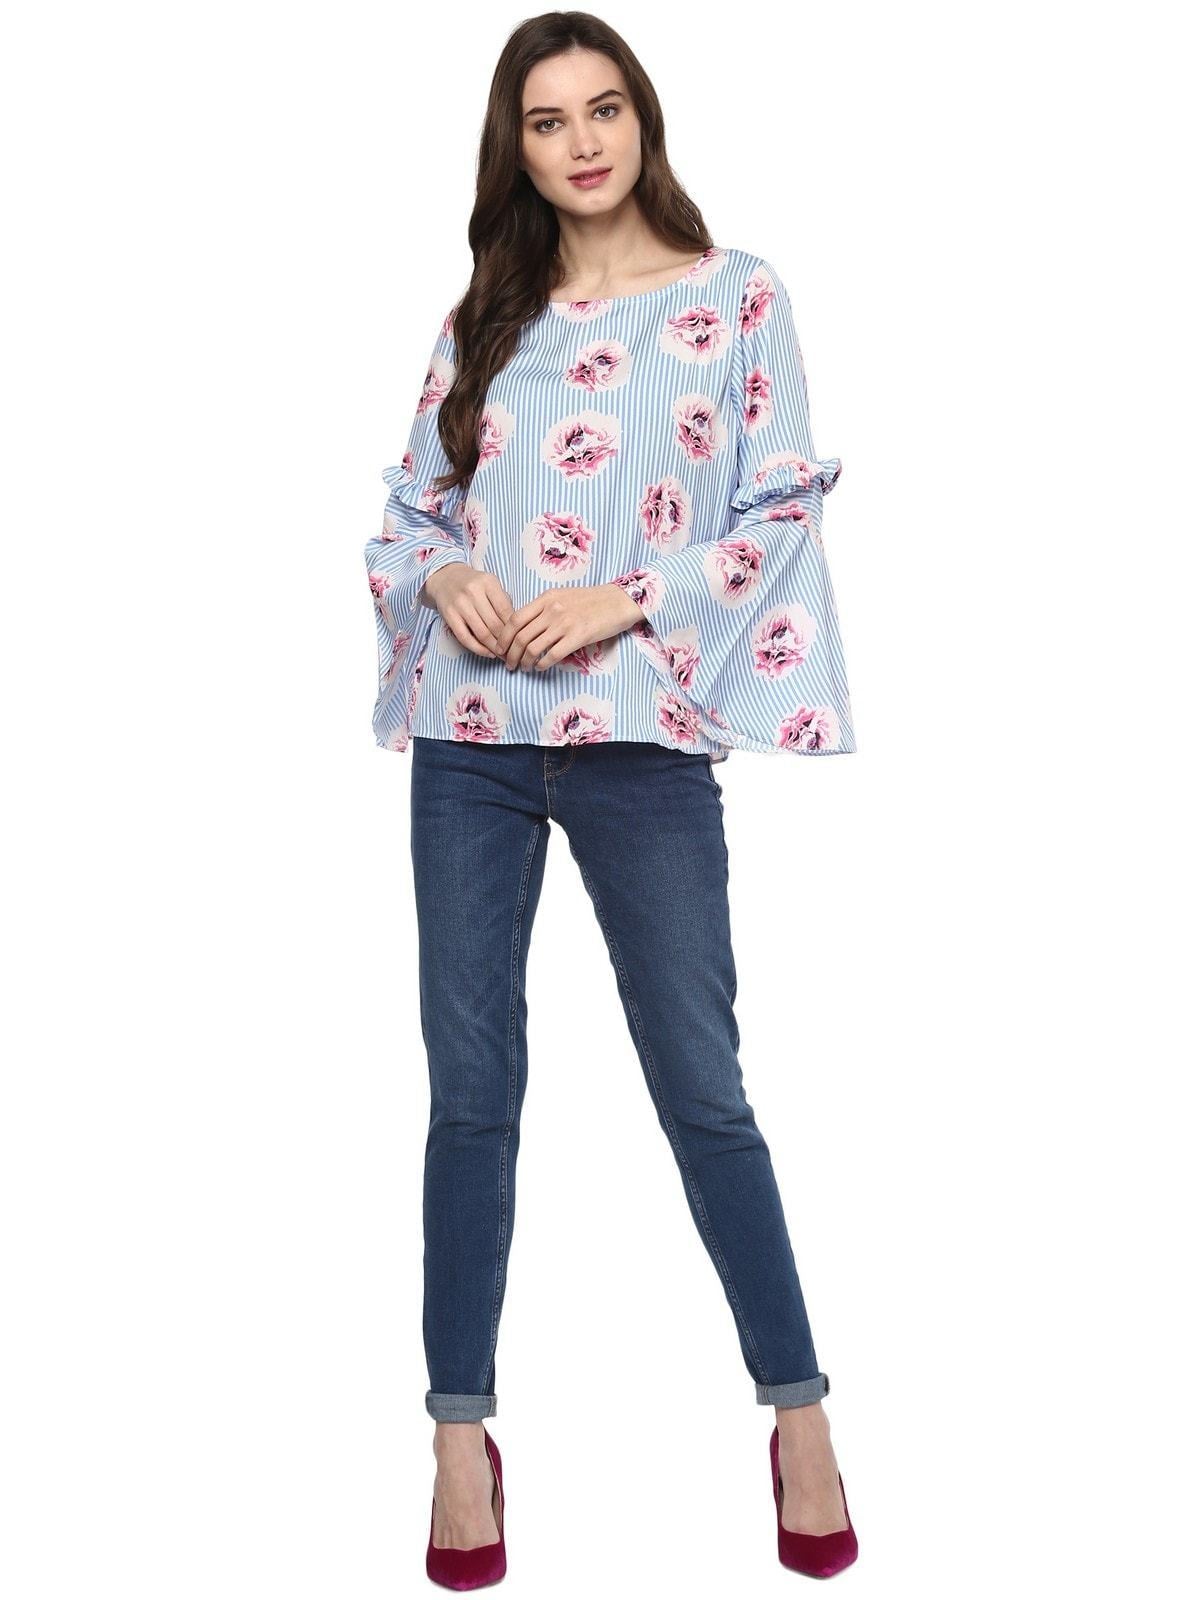 Women's Striped Floral Top - Pannkh